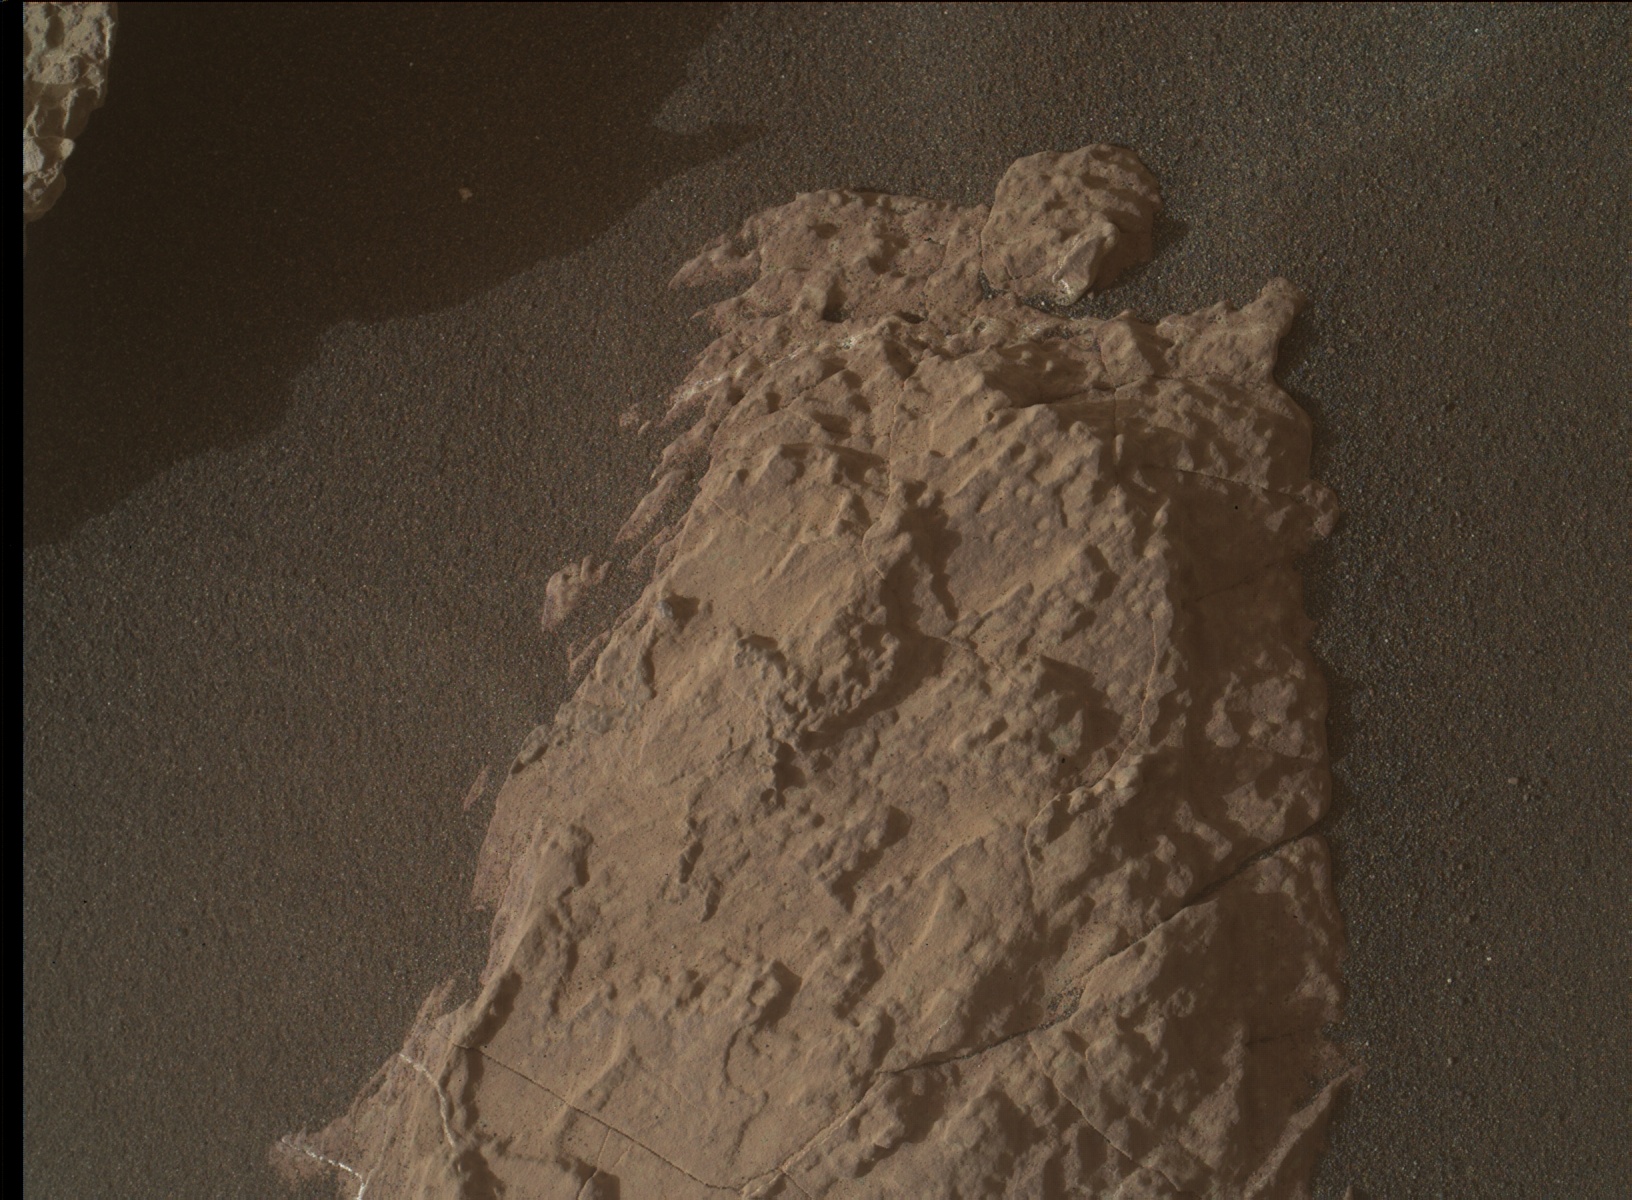 Nasa's Mars rover Curiosity acquired this image using its Mars Hand Lens Imager (MAHLI) on Sol 2999